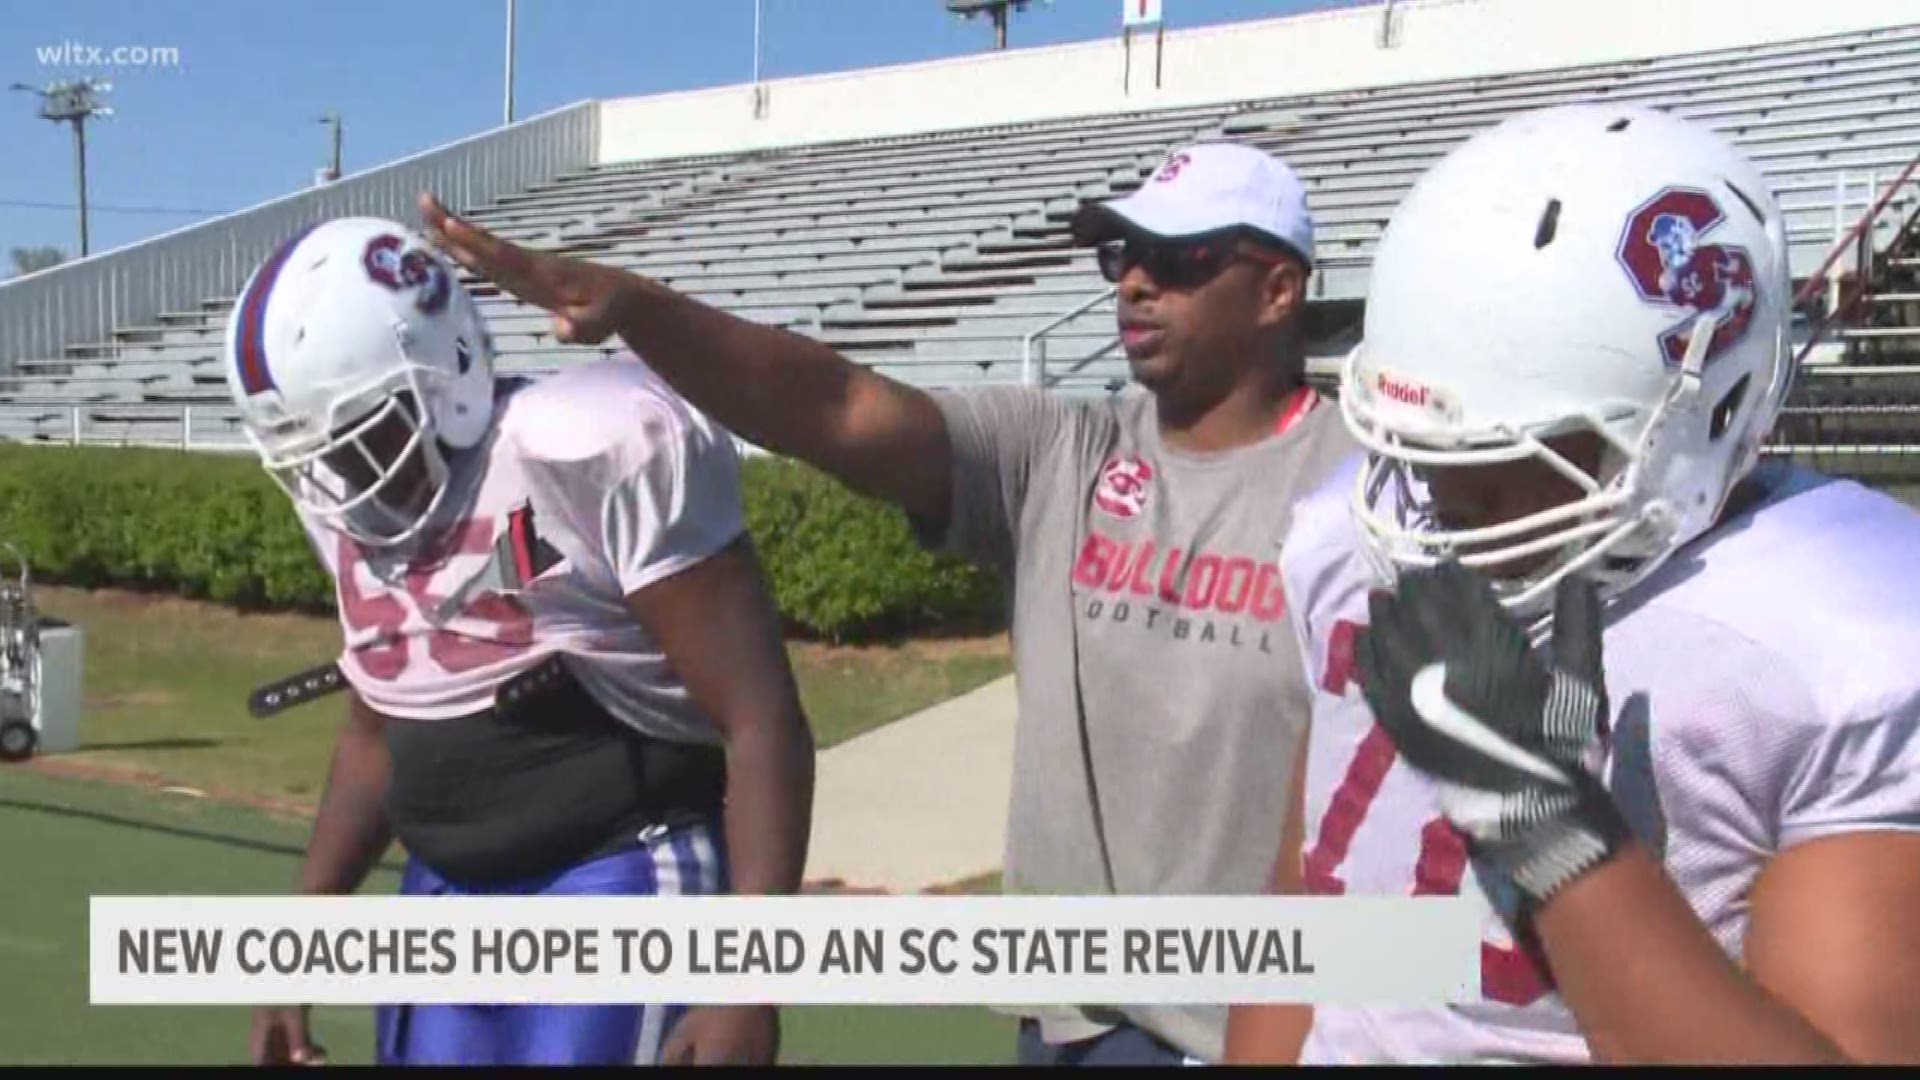 With a low position in the MEAC preseason poll, SC State head coach Buddy Pough hopes new additions on the coaching staff will be the spark to get this team back near the top of the conference.